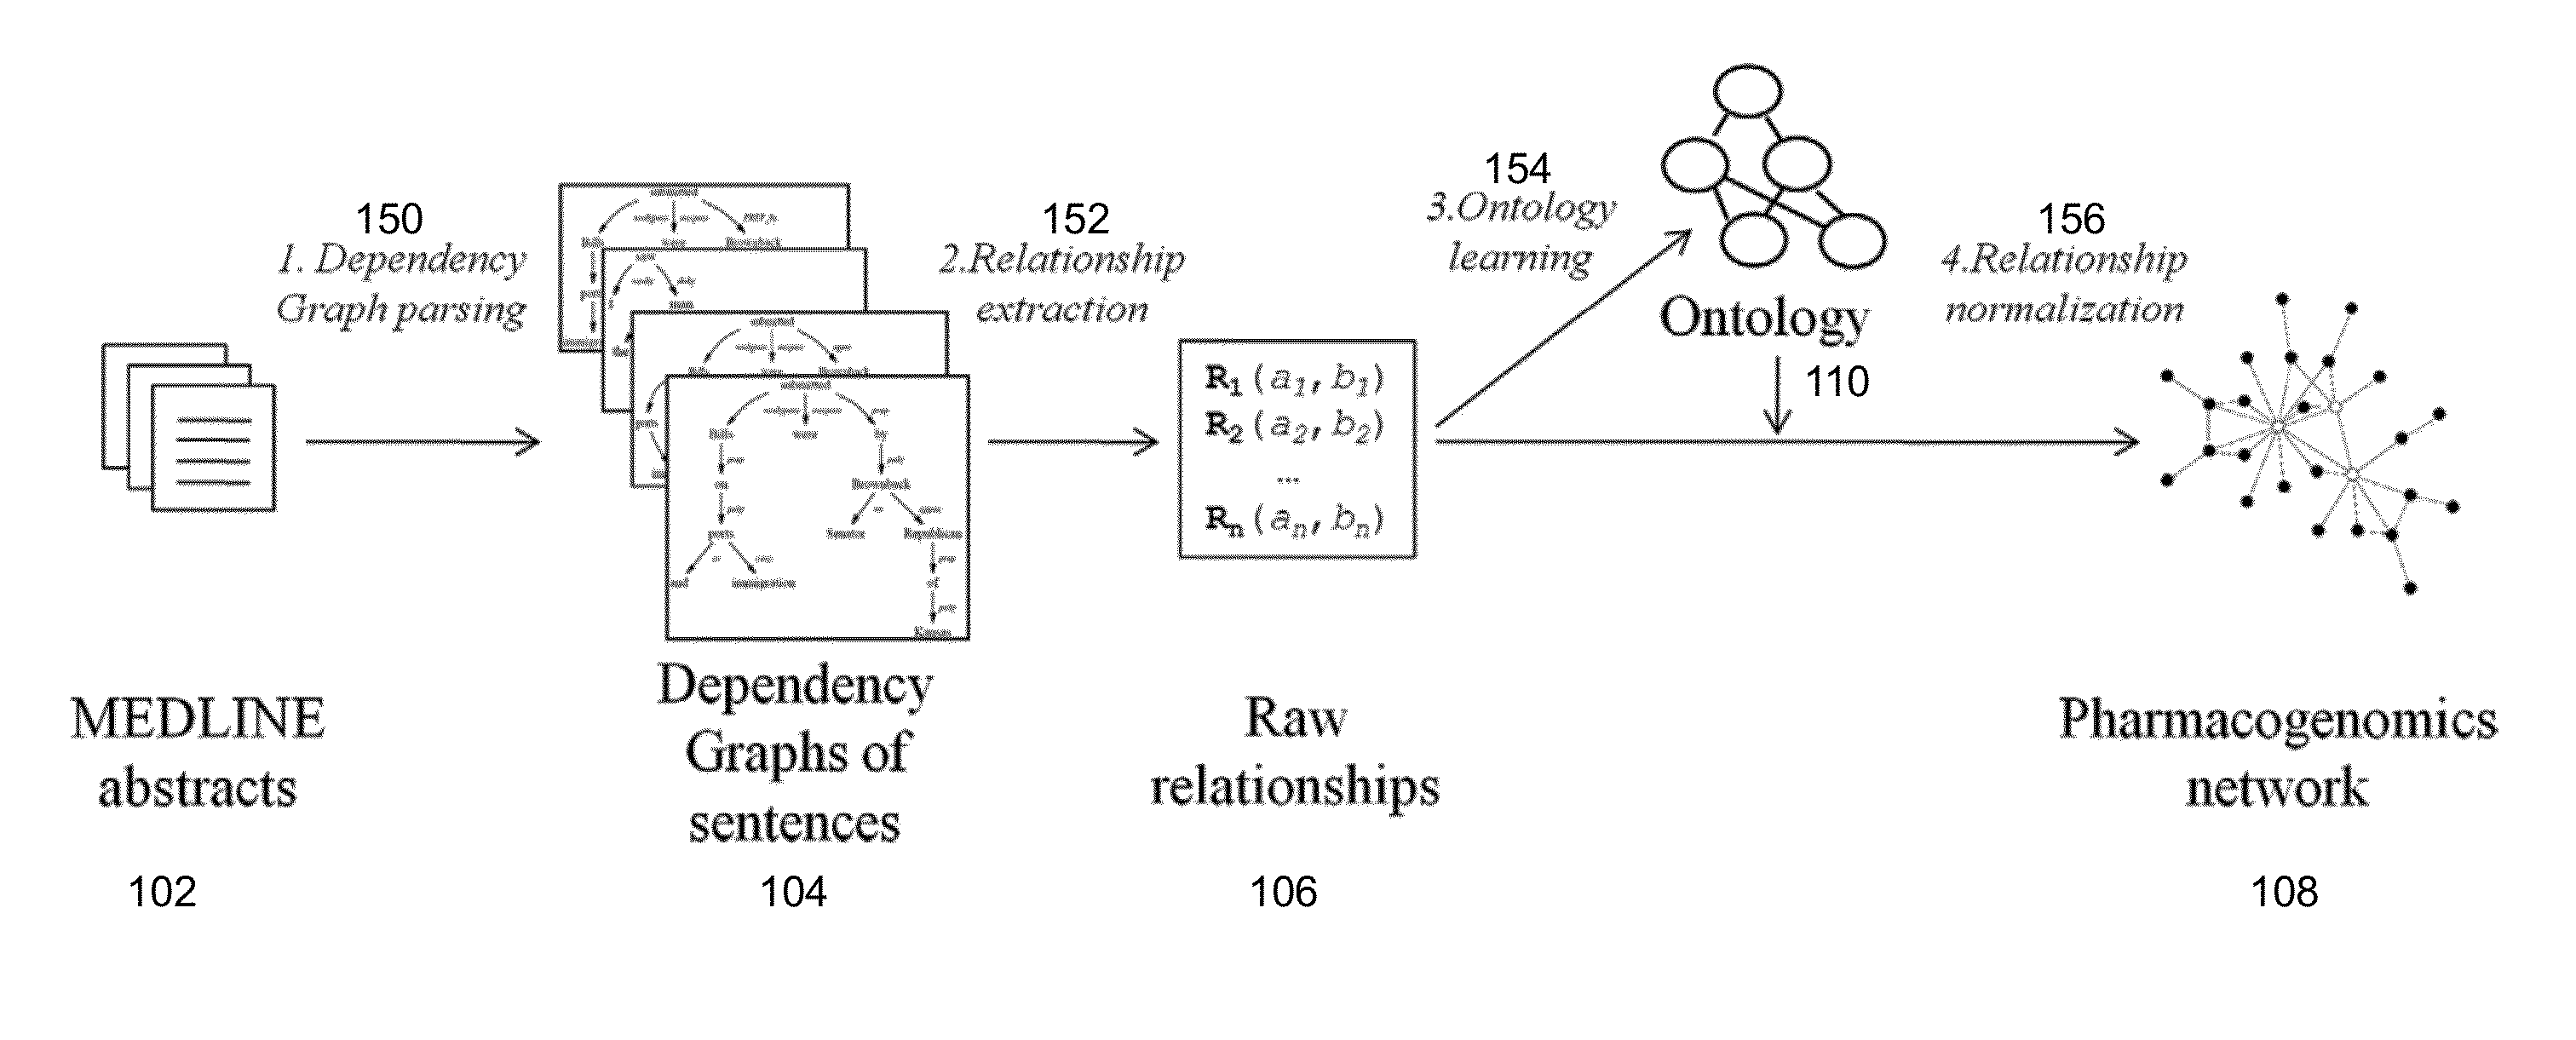 Method And System For Extraction And Normalization Of Relationships Via Ontology Induction